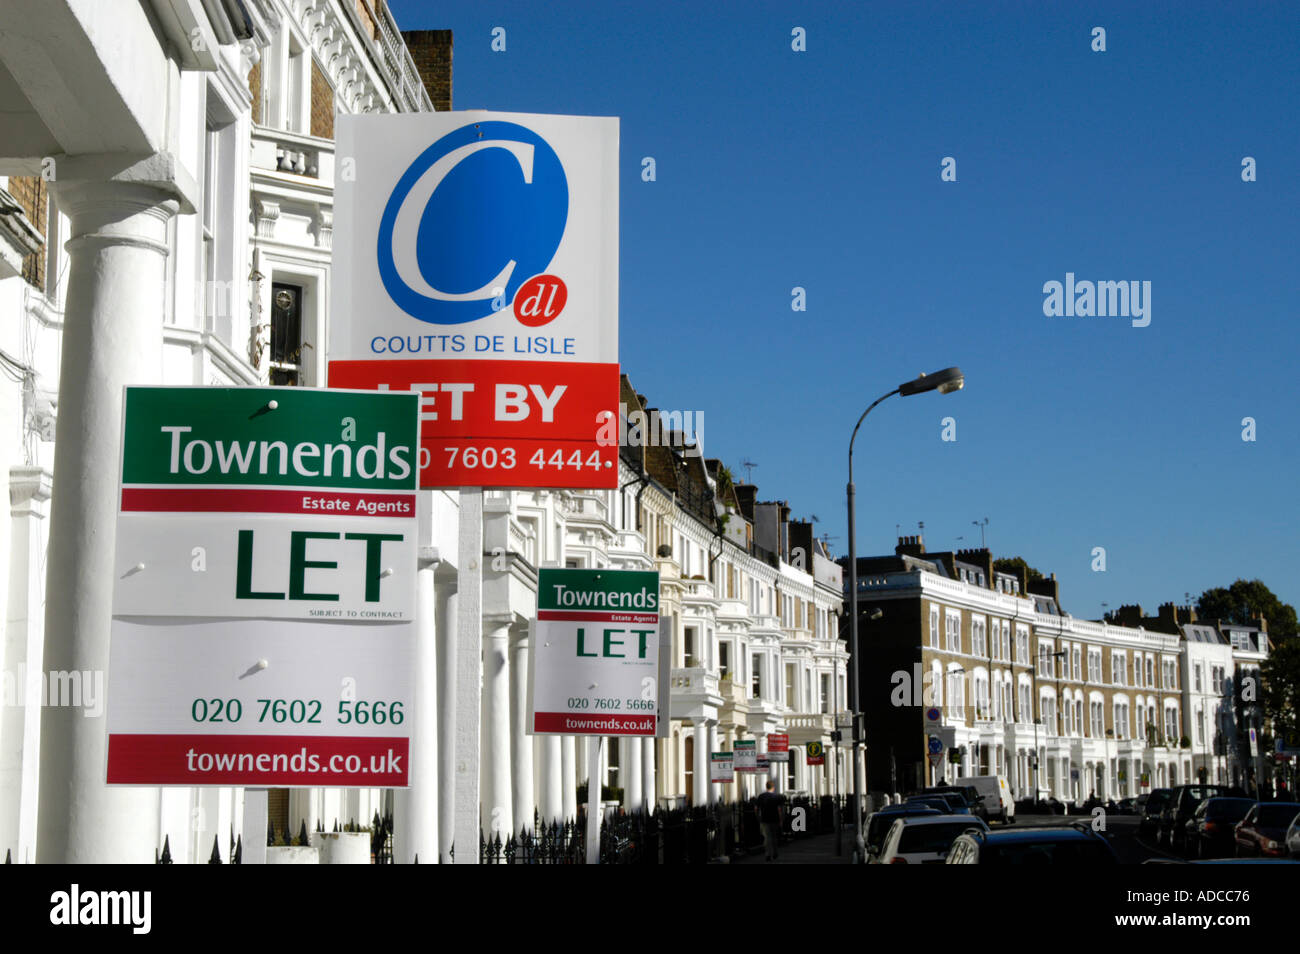 To Let property signs in residential street, London England UK Stock Photo